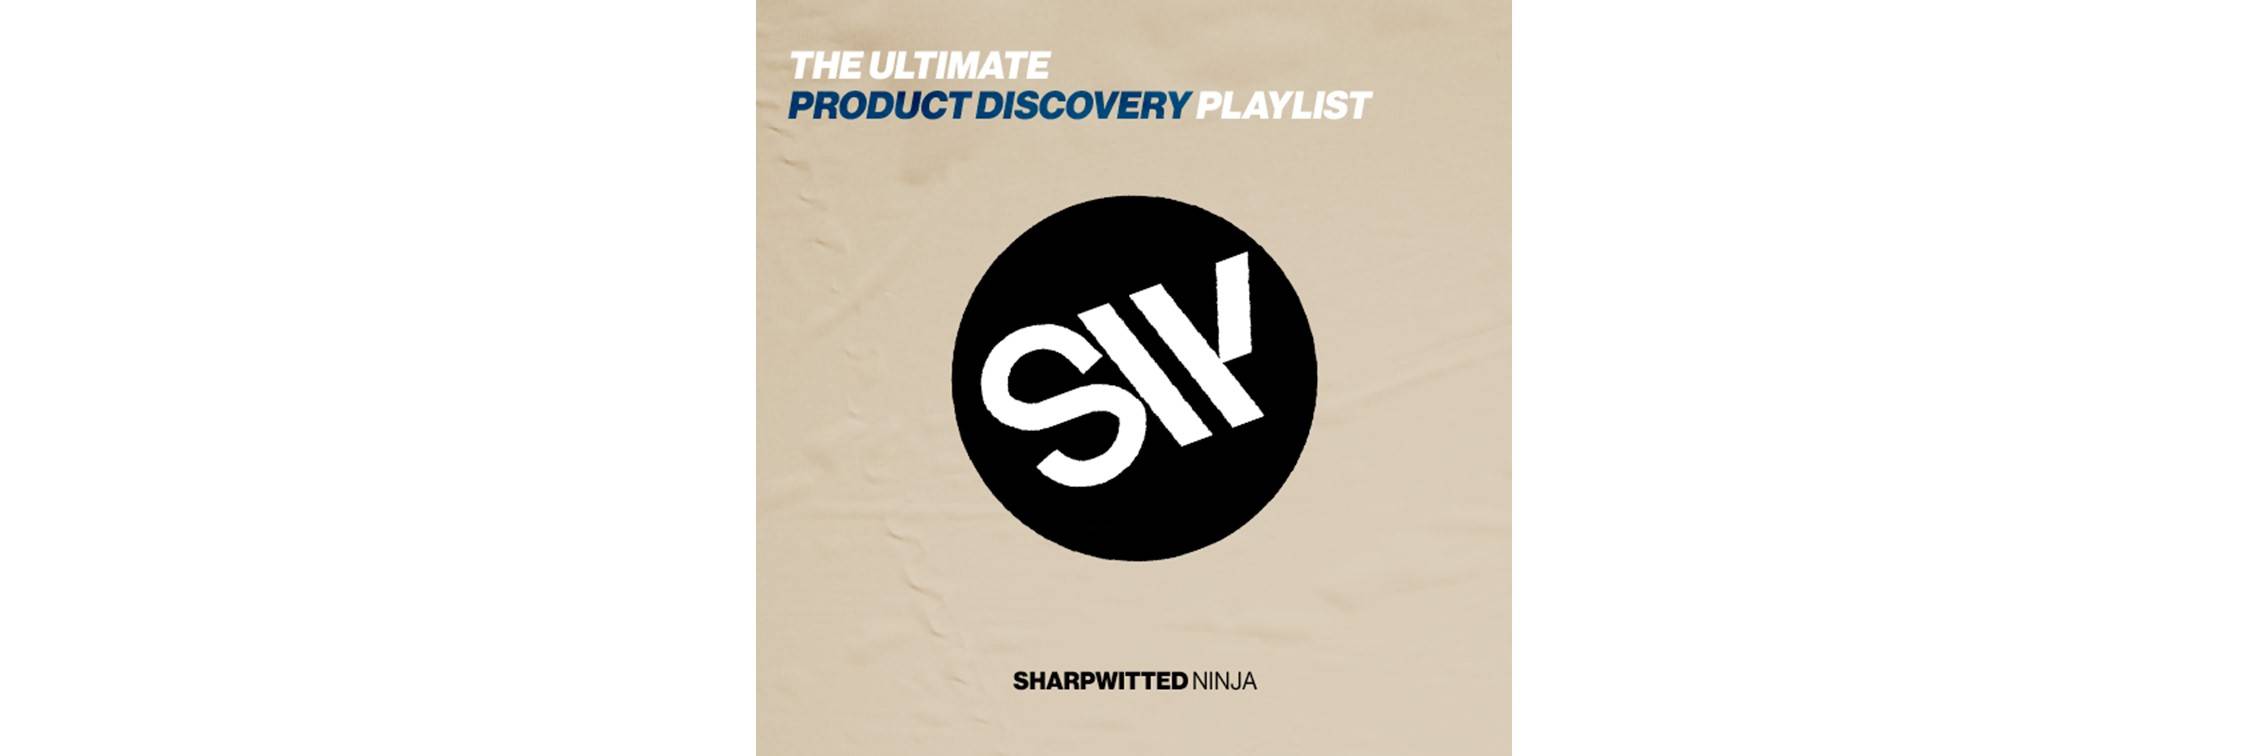 Sharpwitted Present: The Ultimate Product Discovery Playlist. A list of songs that embody the essence of a great Product Discovery.